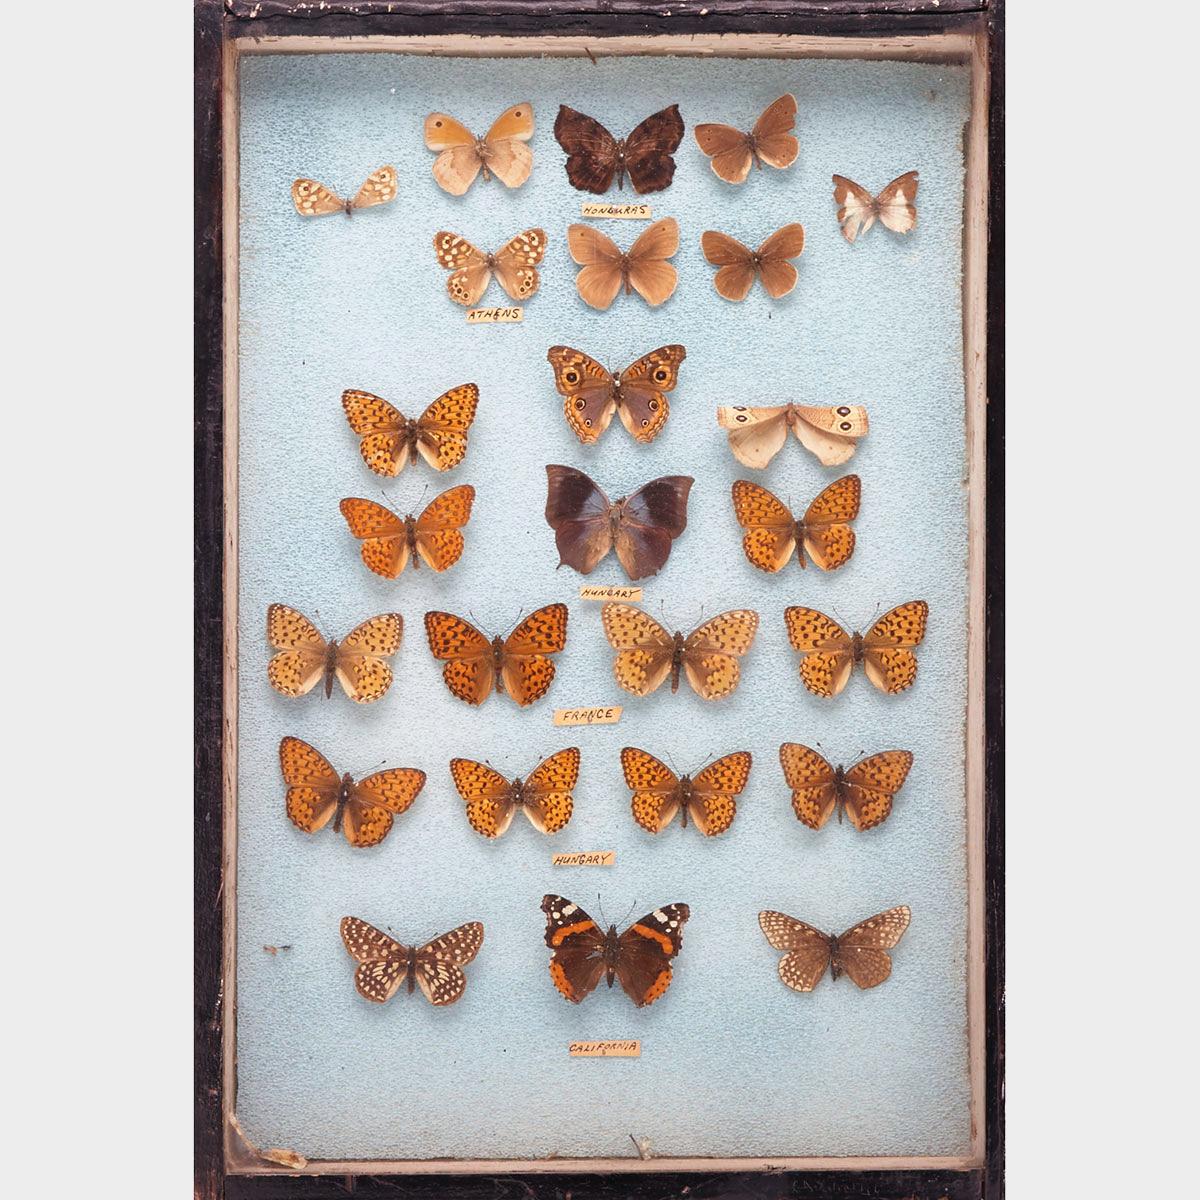 Six Victorian Lepidopterological Cases, 19th century